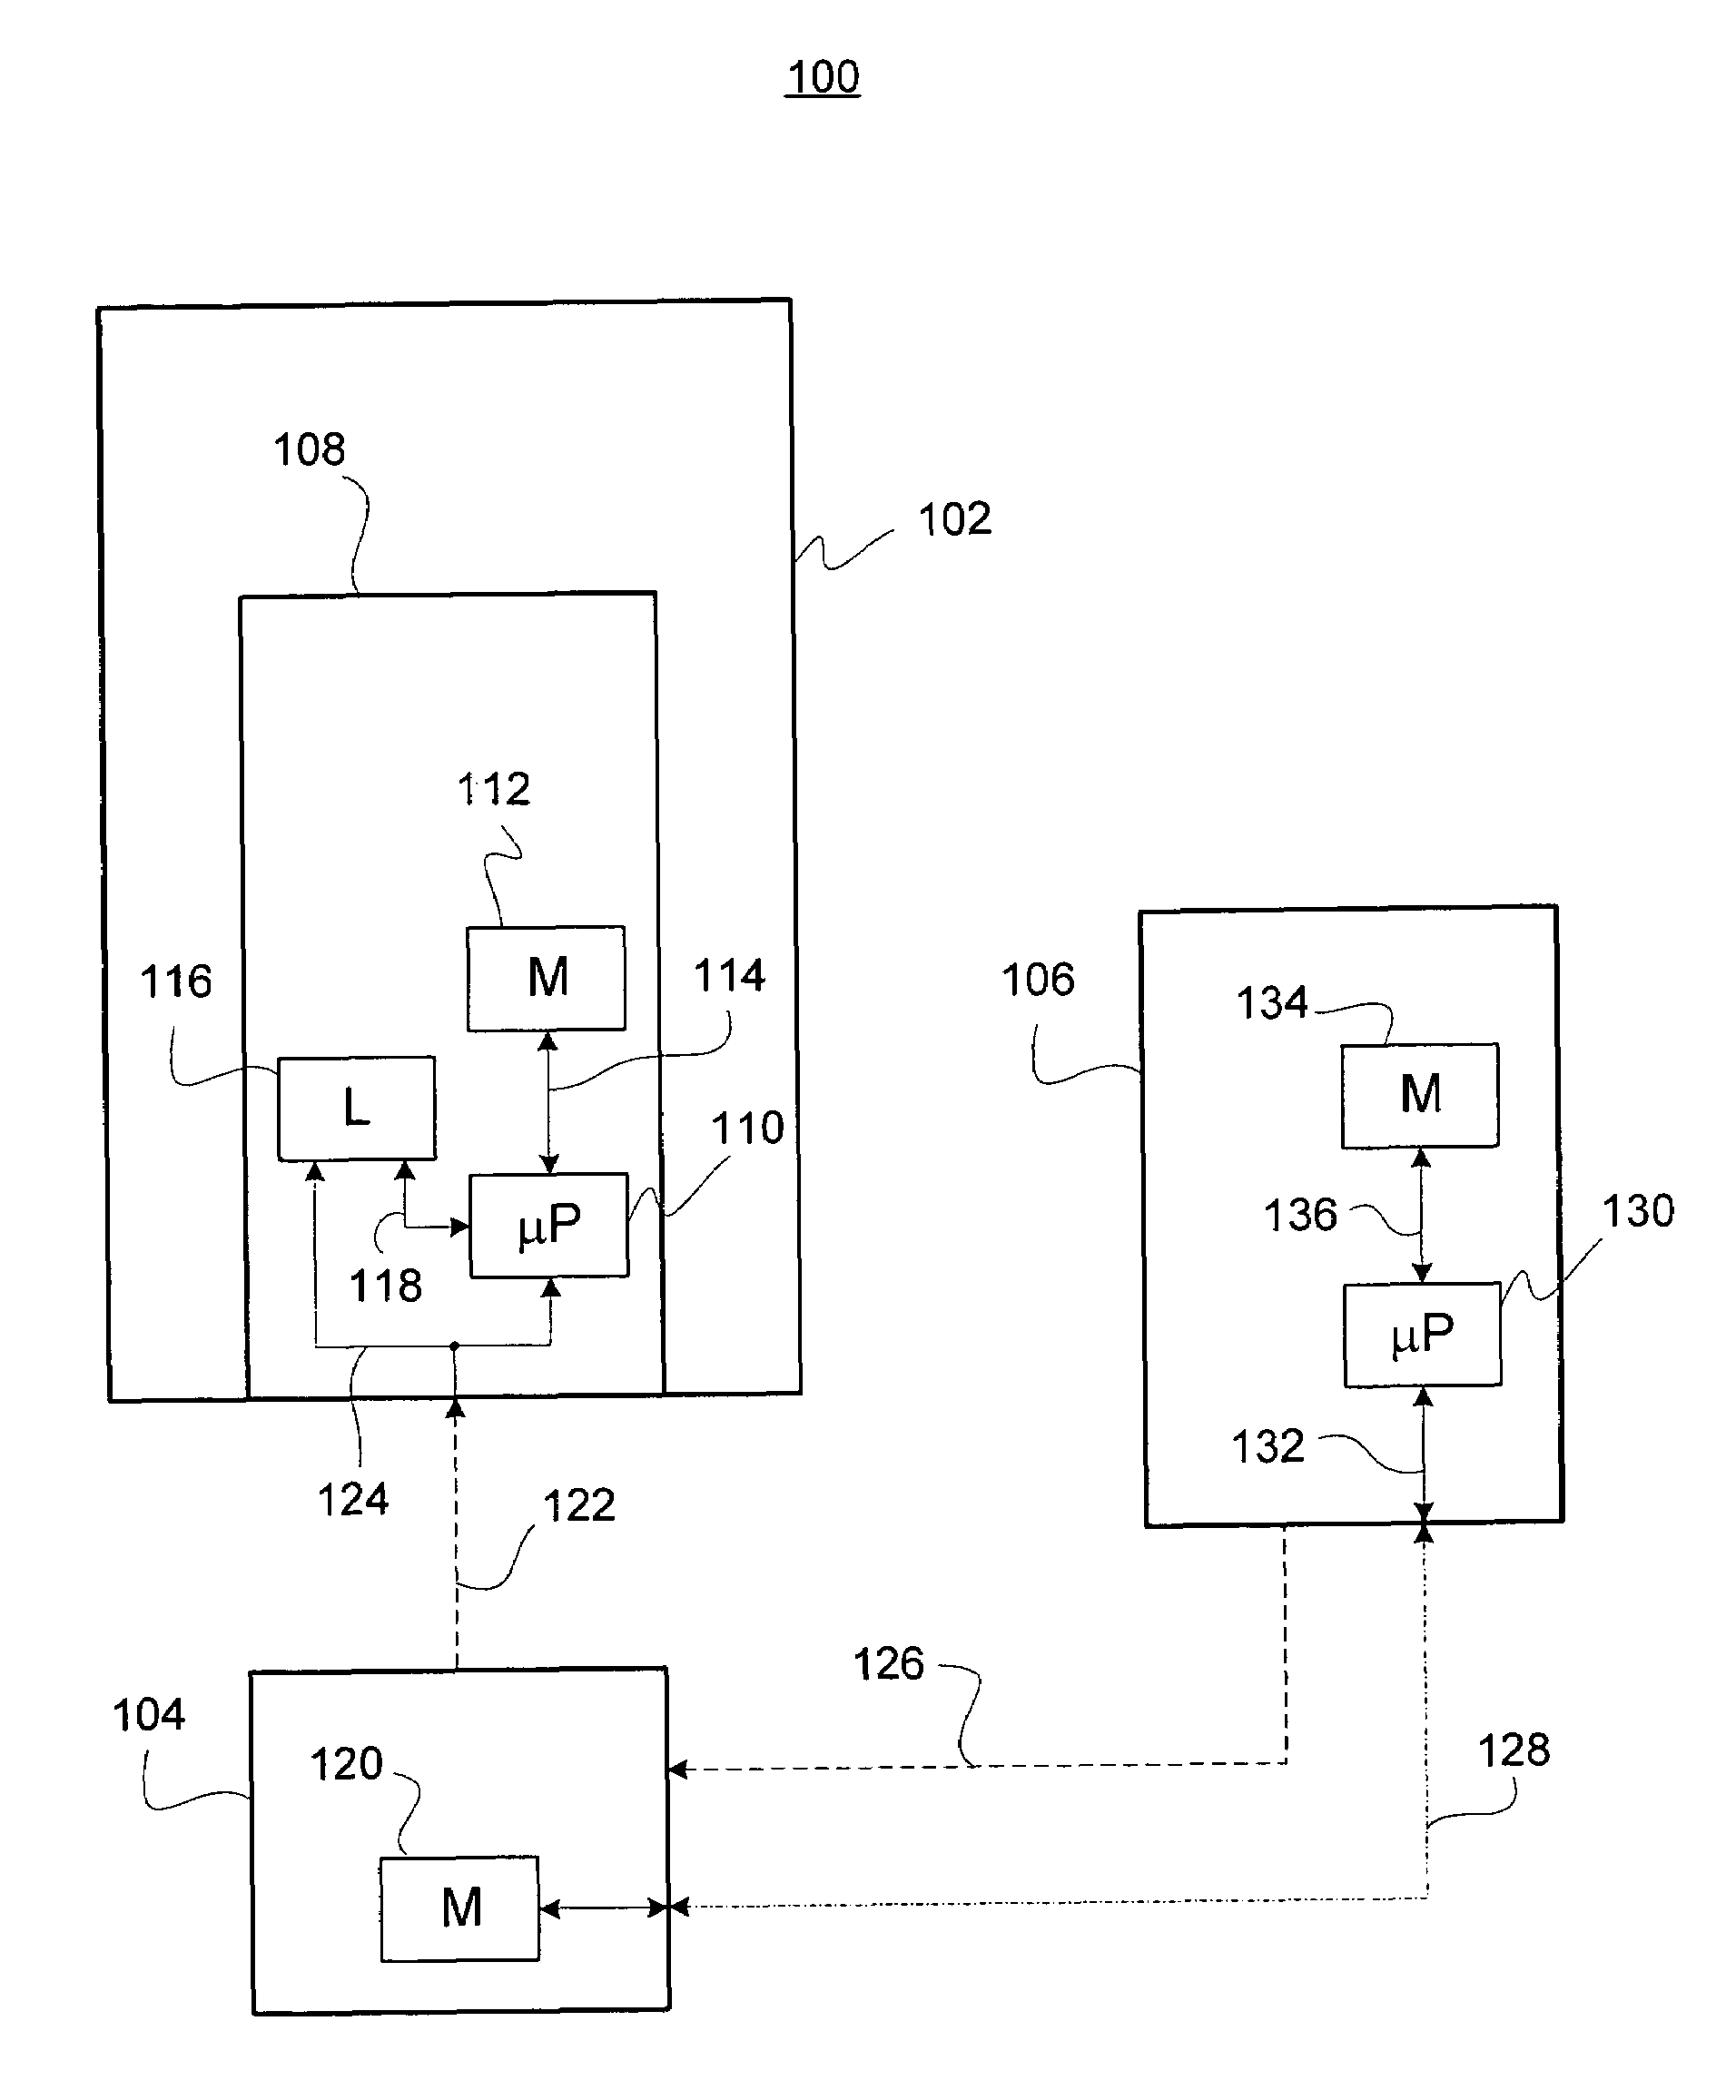 Method for utilizing temperature to determine a battery state